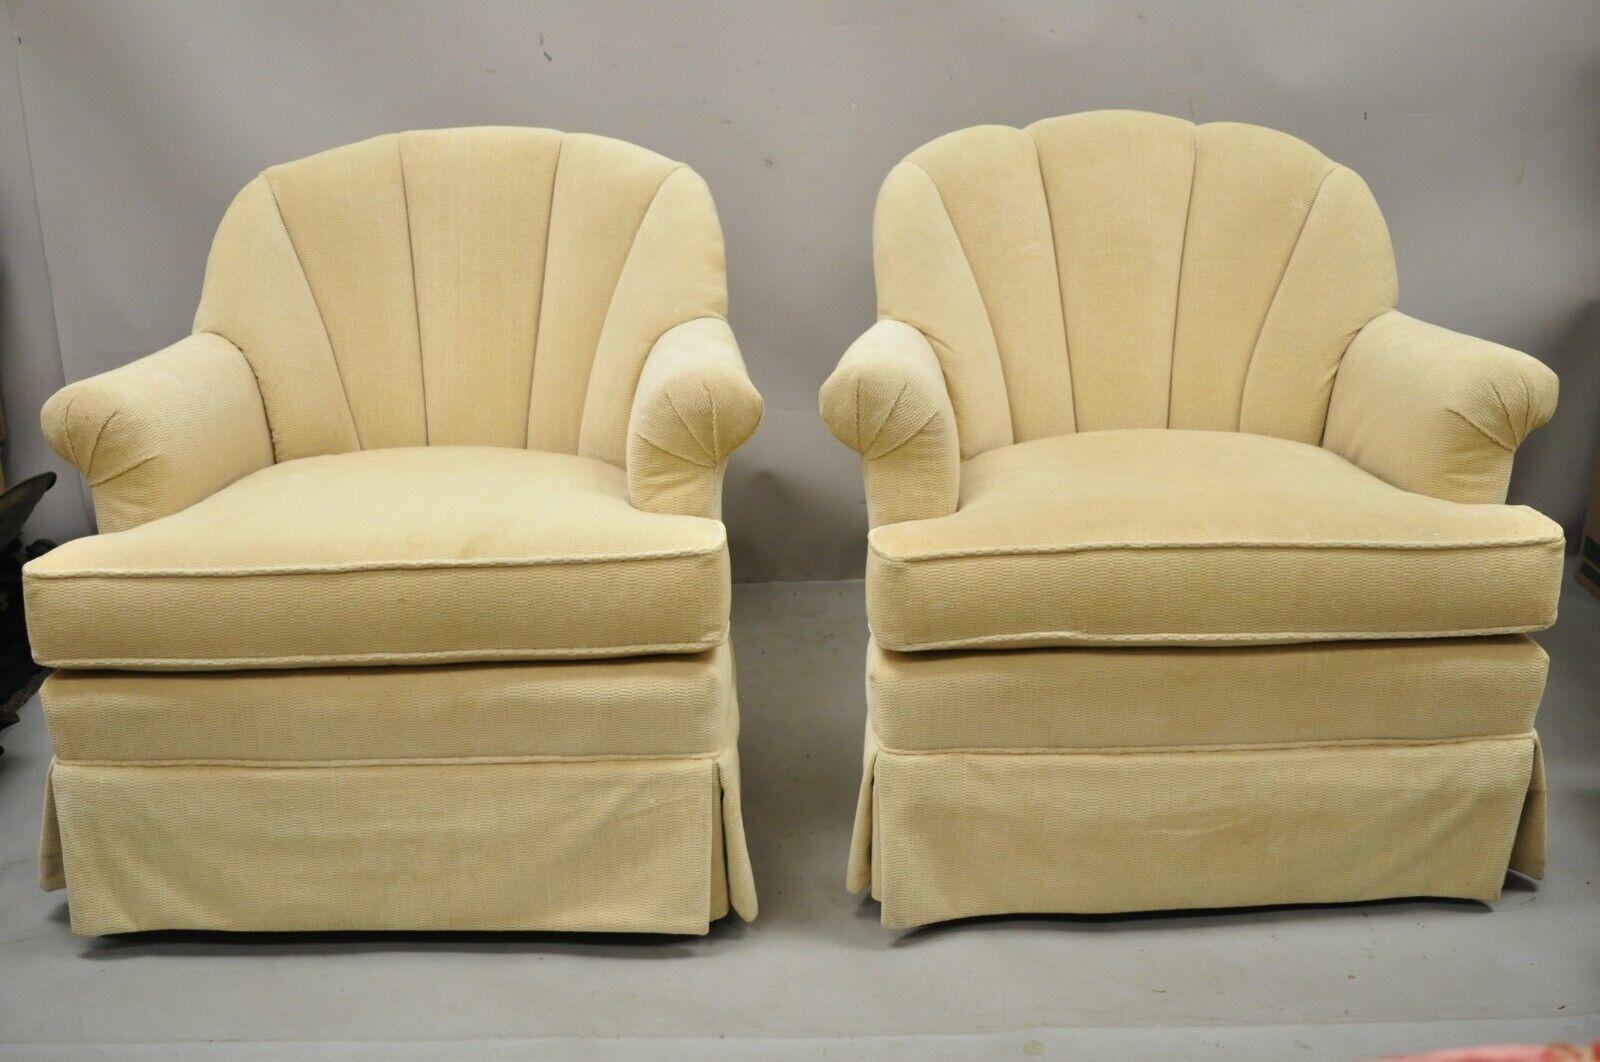 Pembrook Mid Century Modern Beige Swivel Channel Back Club Lounge Chairs - a Pair. Item features swivel base, tufted channel backs, rolled arms, fully upholstered frames, original label, clean modernist lines, quality American craftsmanship. Circa